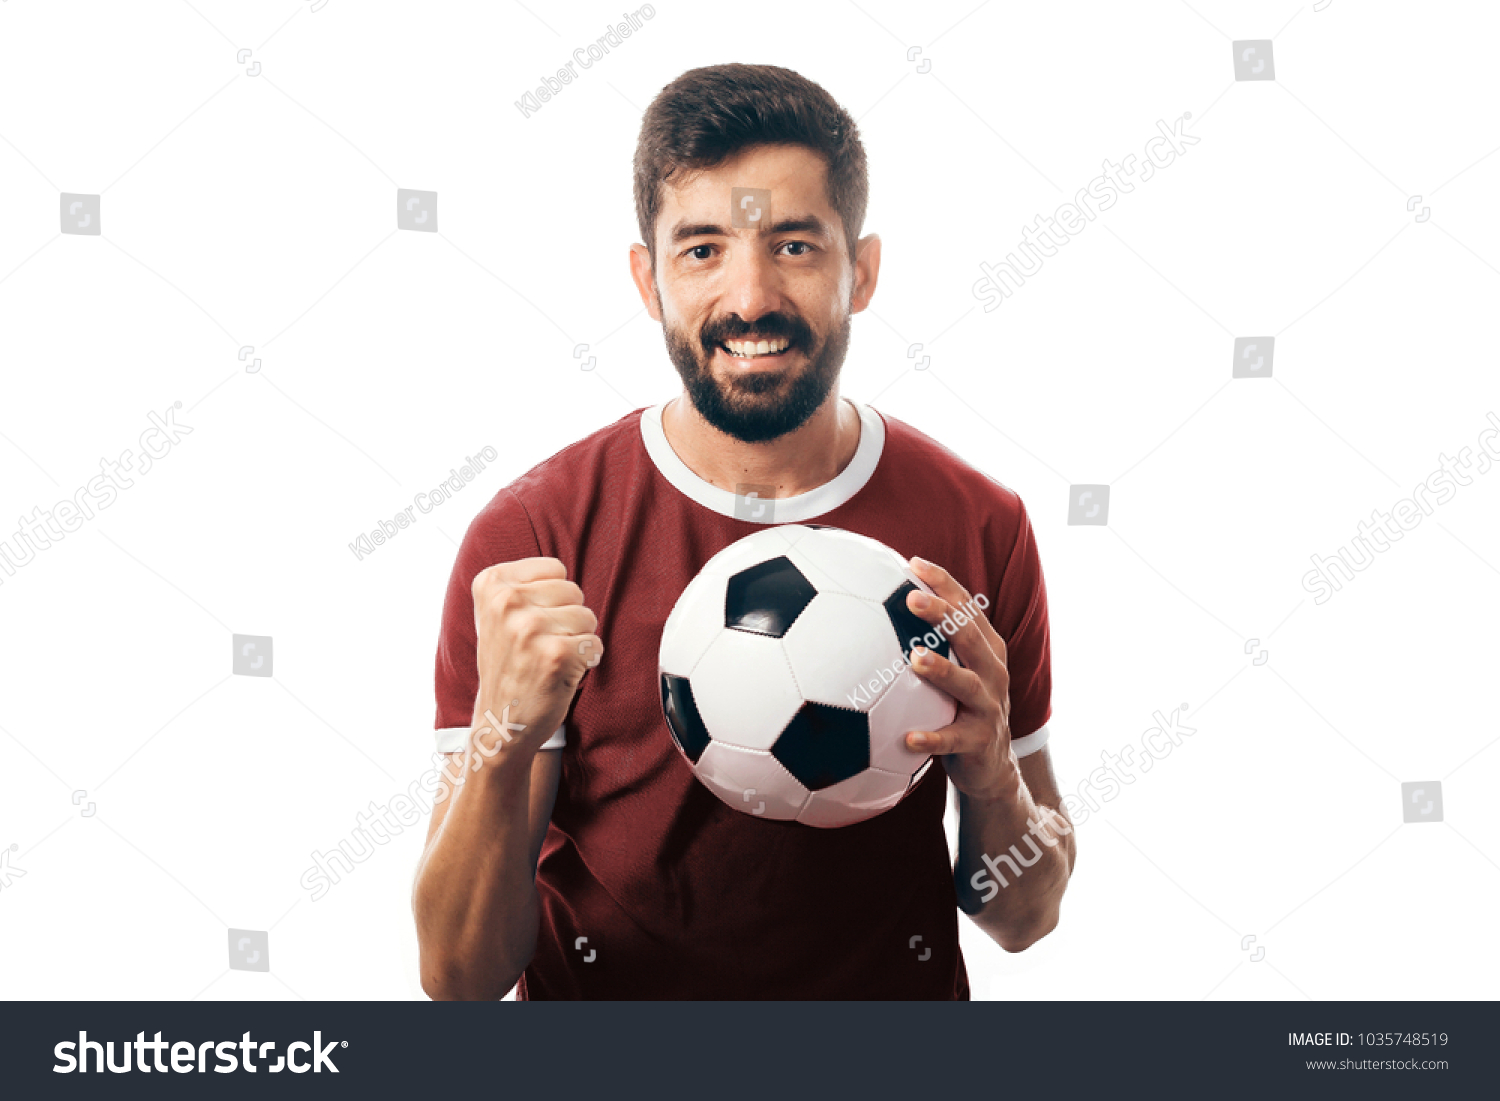 Fan or sport player on red uniform celebrating on white background #1035748519